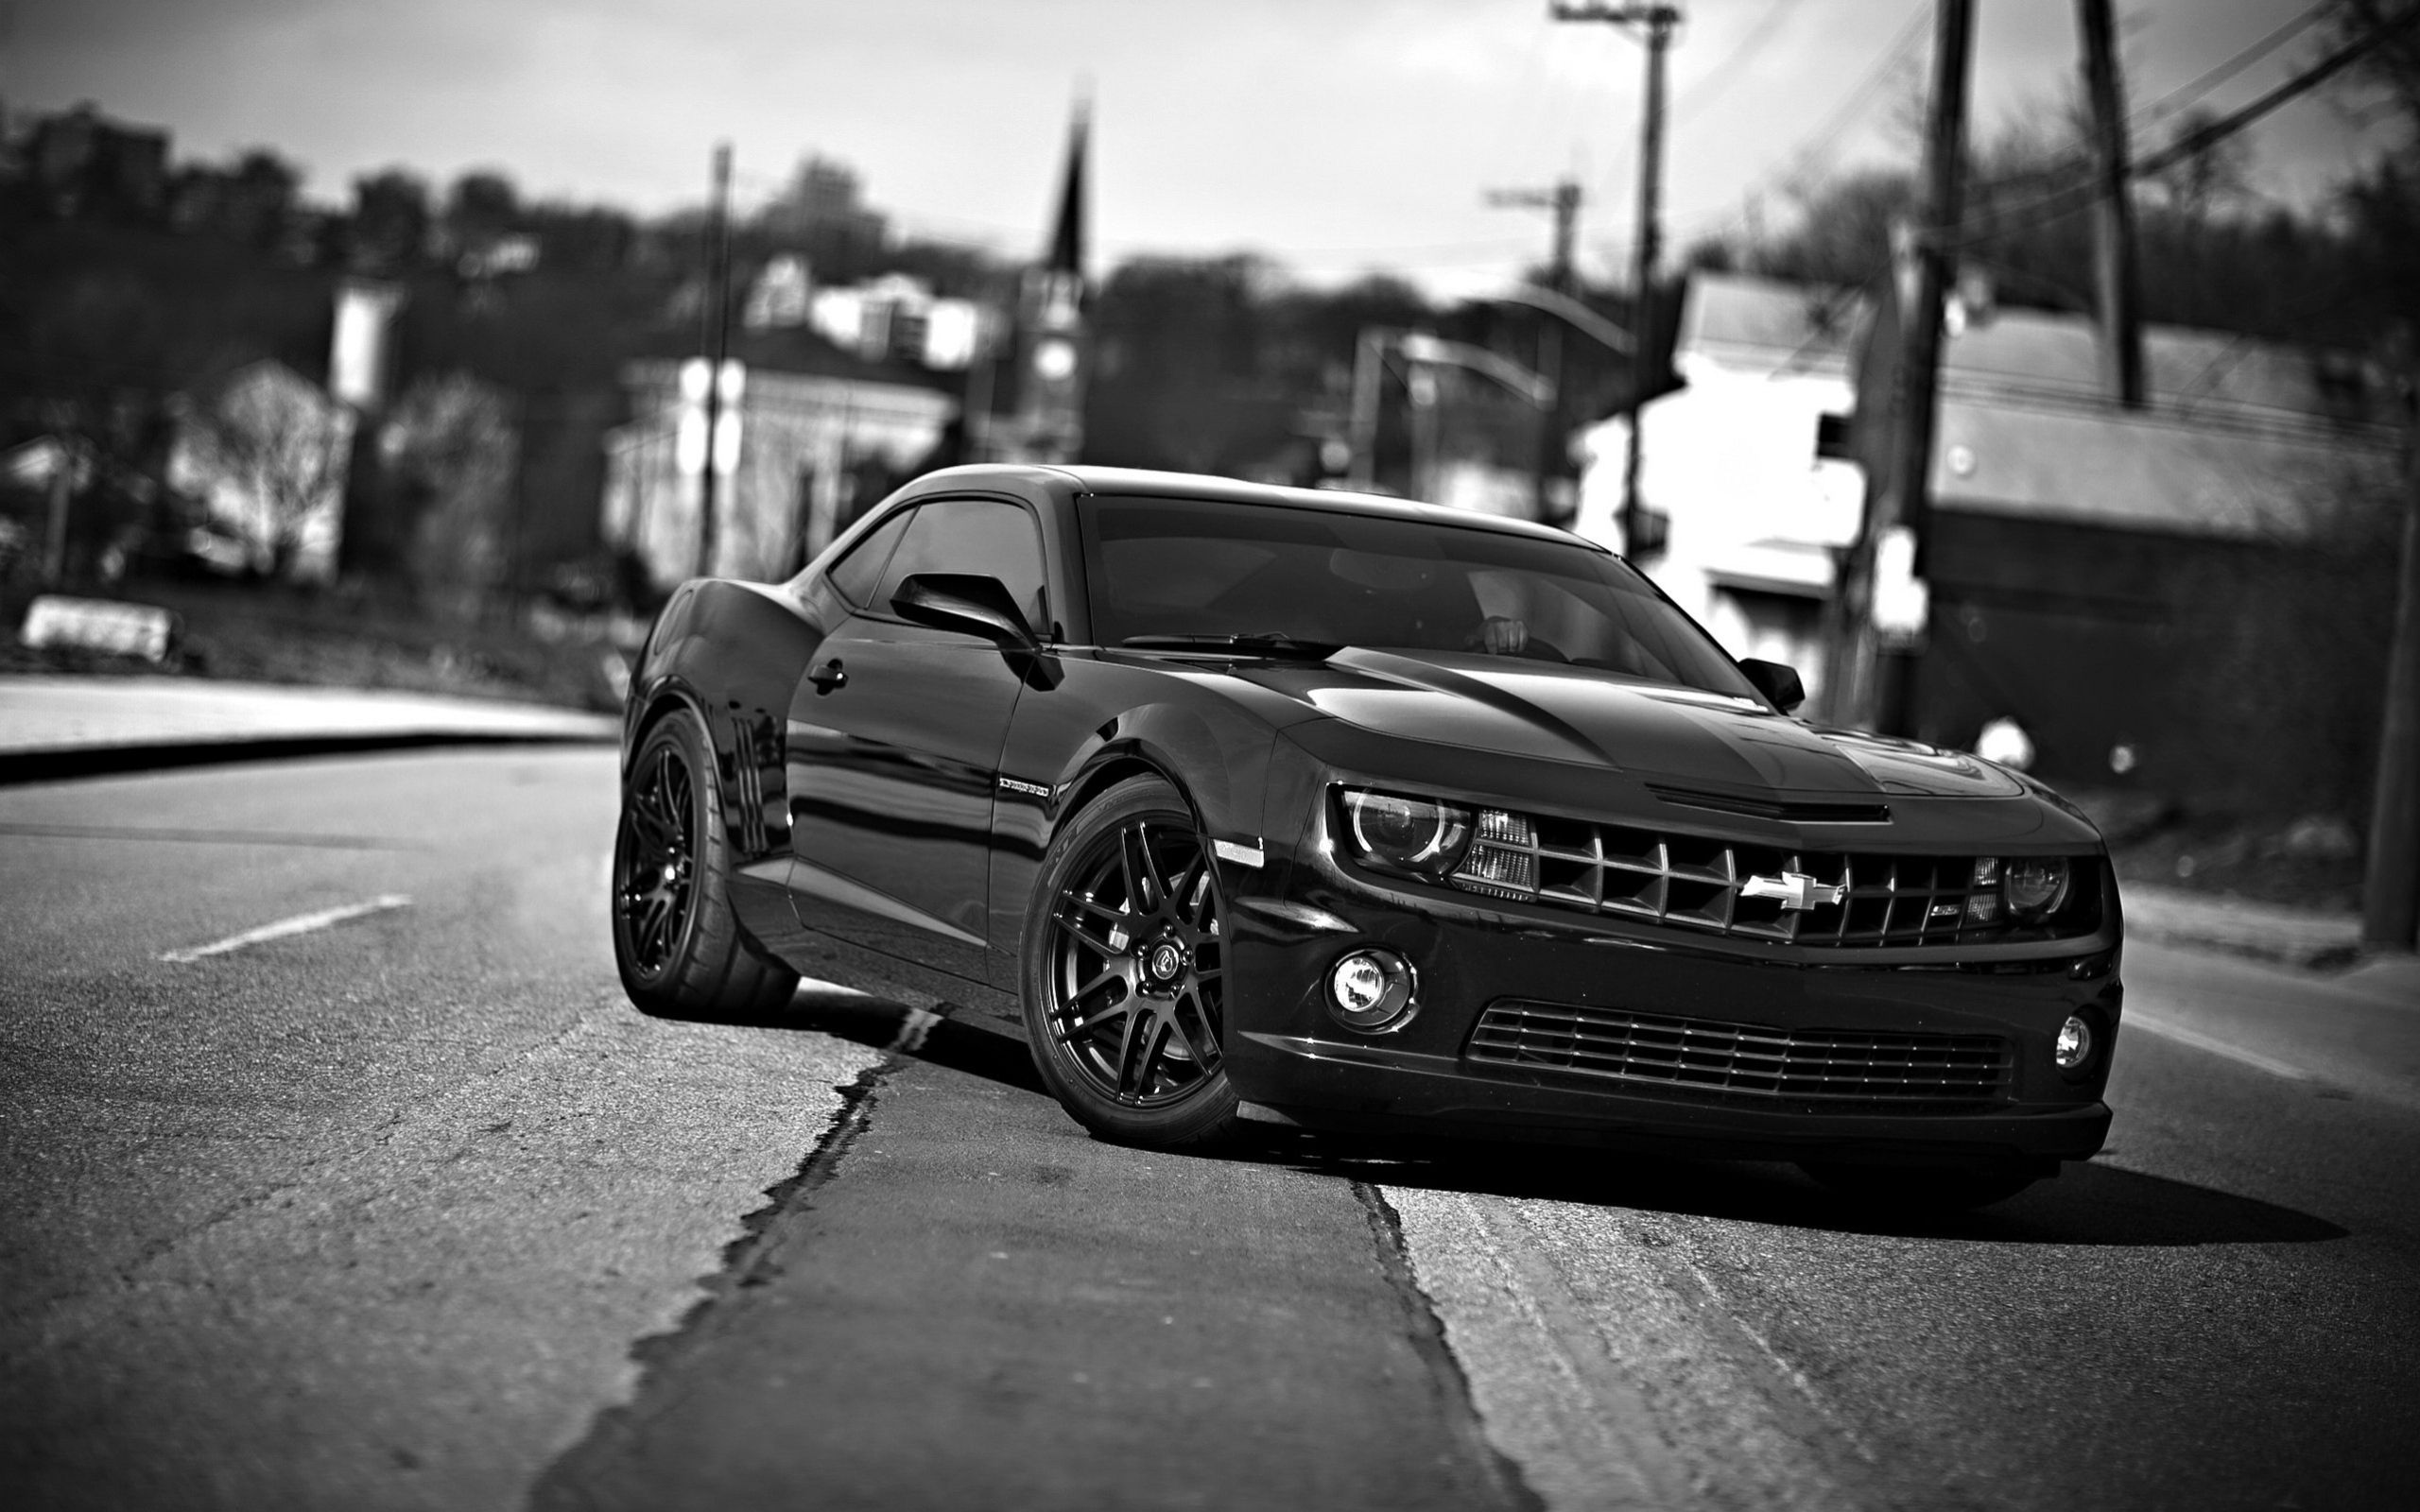 auto, front view, chevrolet camaro, cars, chb, chevrolet, bw lock screen backgrounds